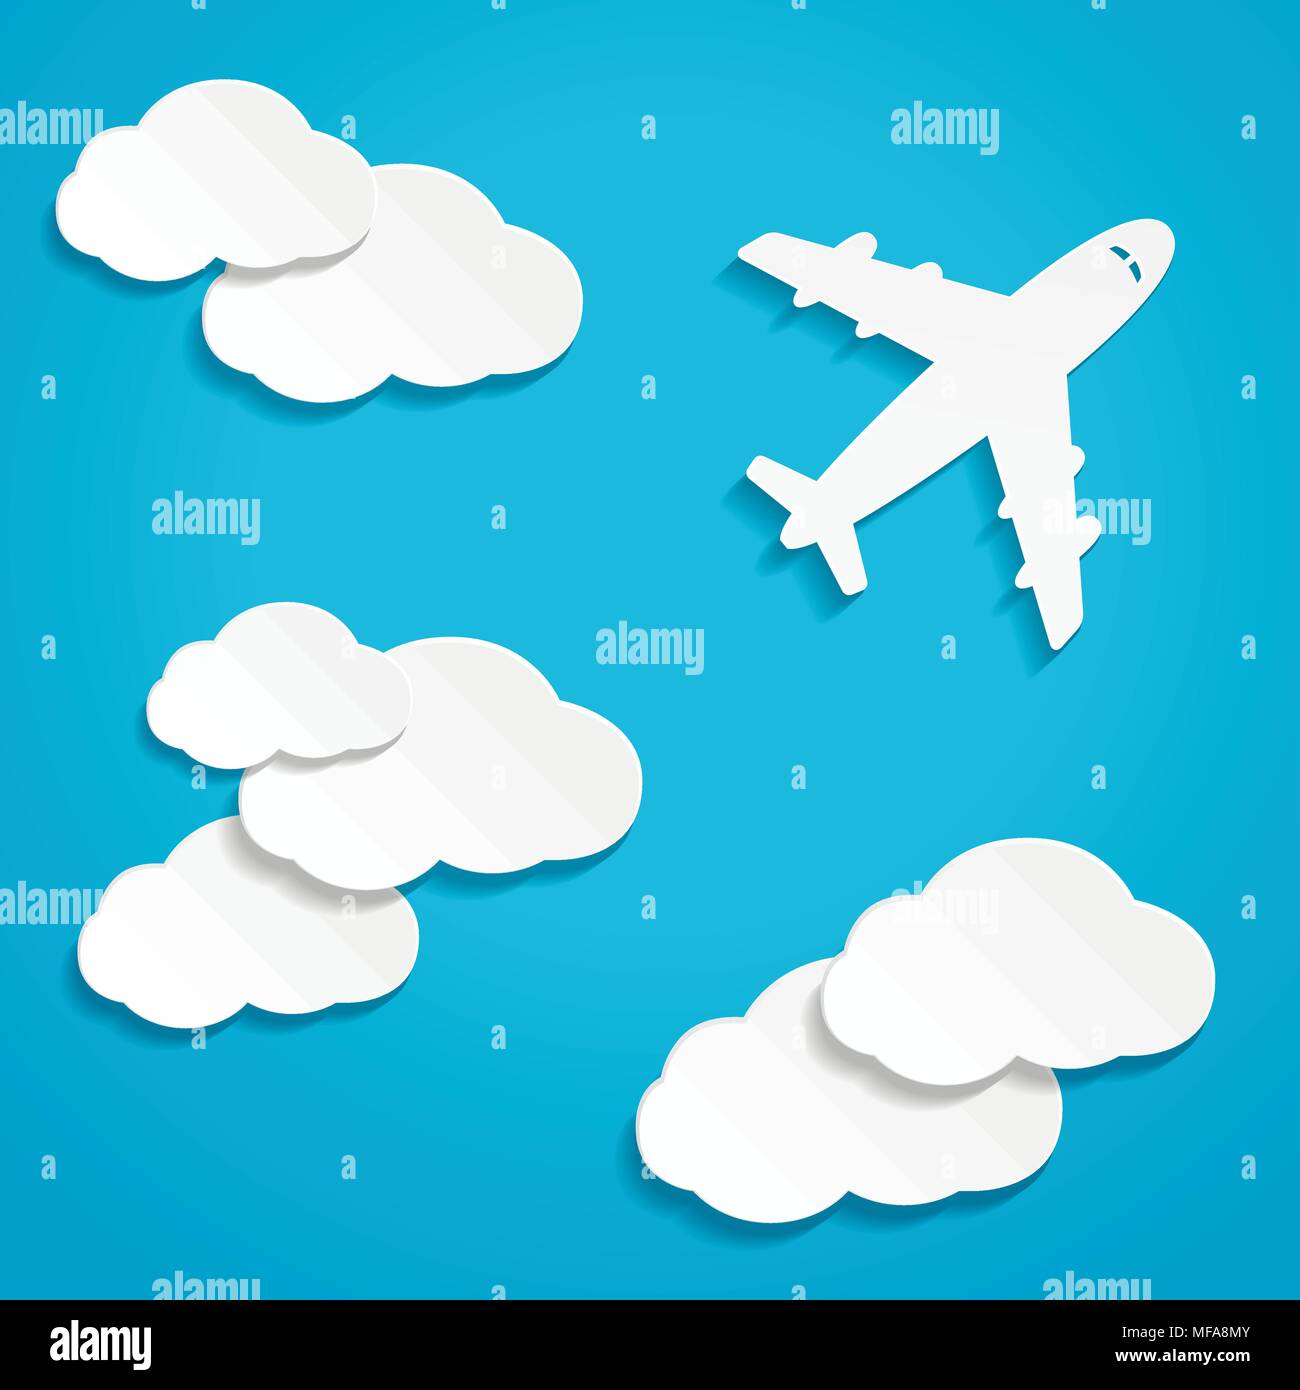 Paper flying plane in clouds. Blue sky travel background. Vector illustration. Stock Vector